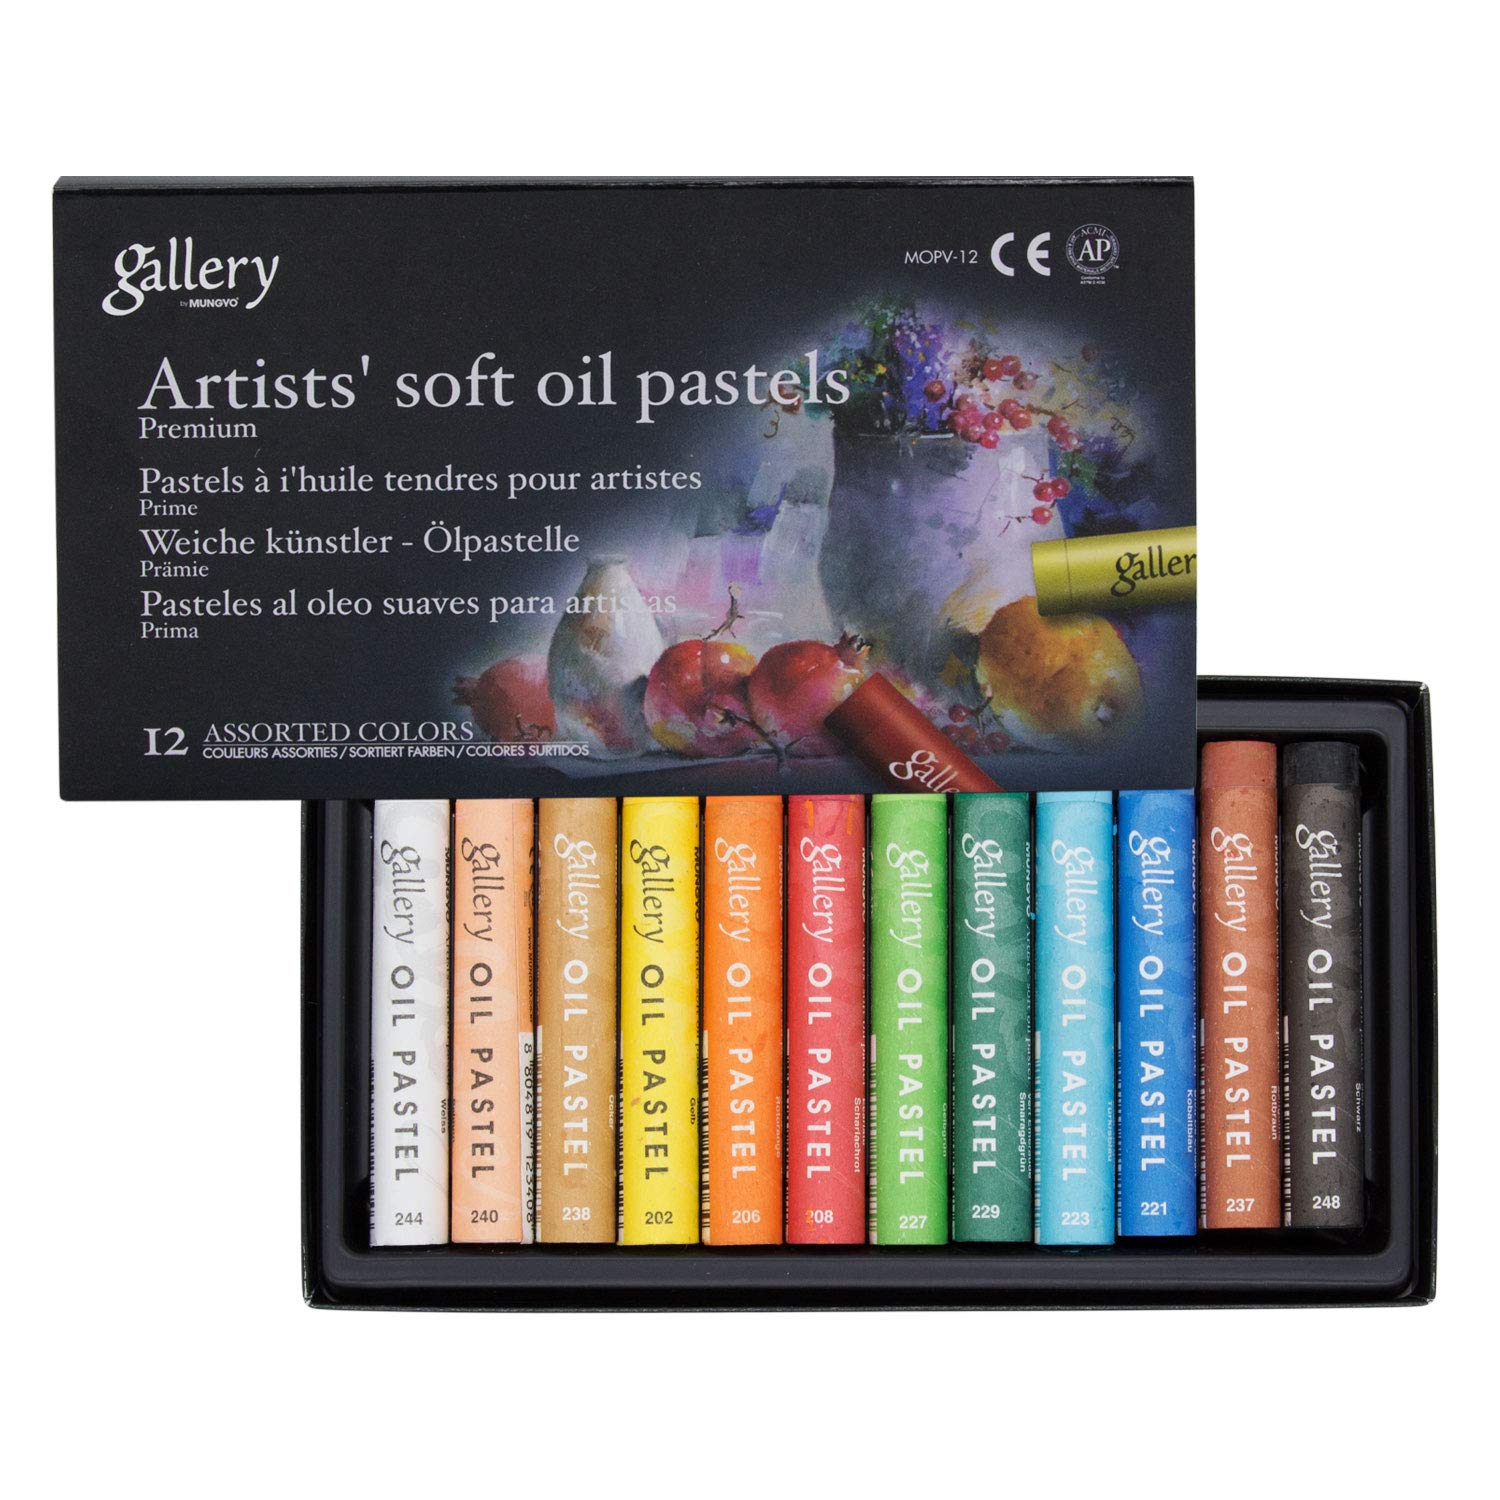 Mungyo Gallery Artists' Soft Oil Pastels Set of 12